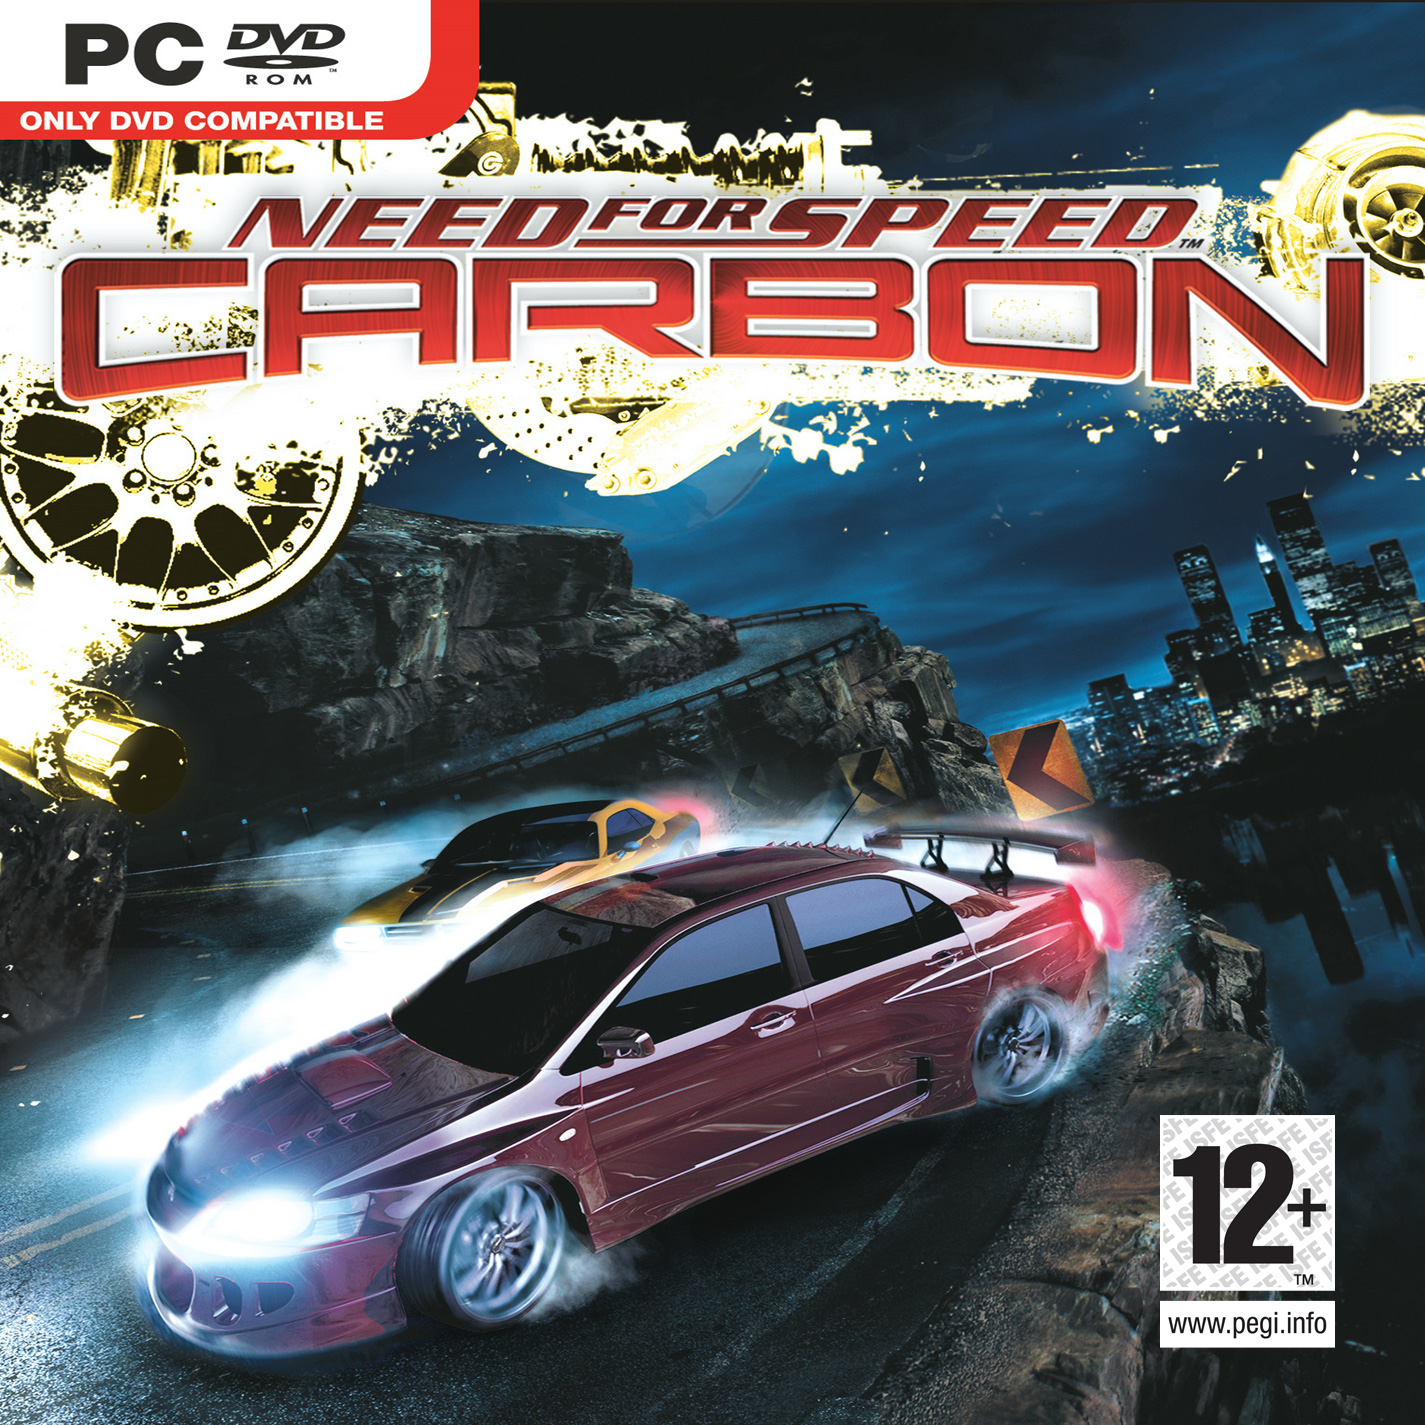 Need for Speed: Carbon - predný CD obal.